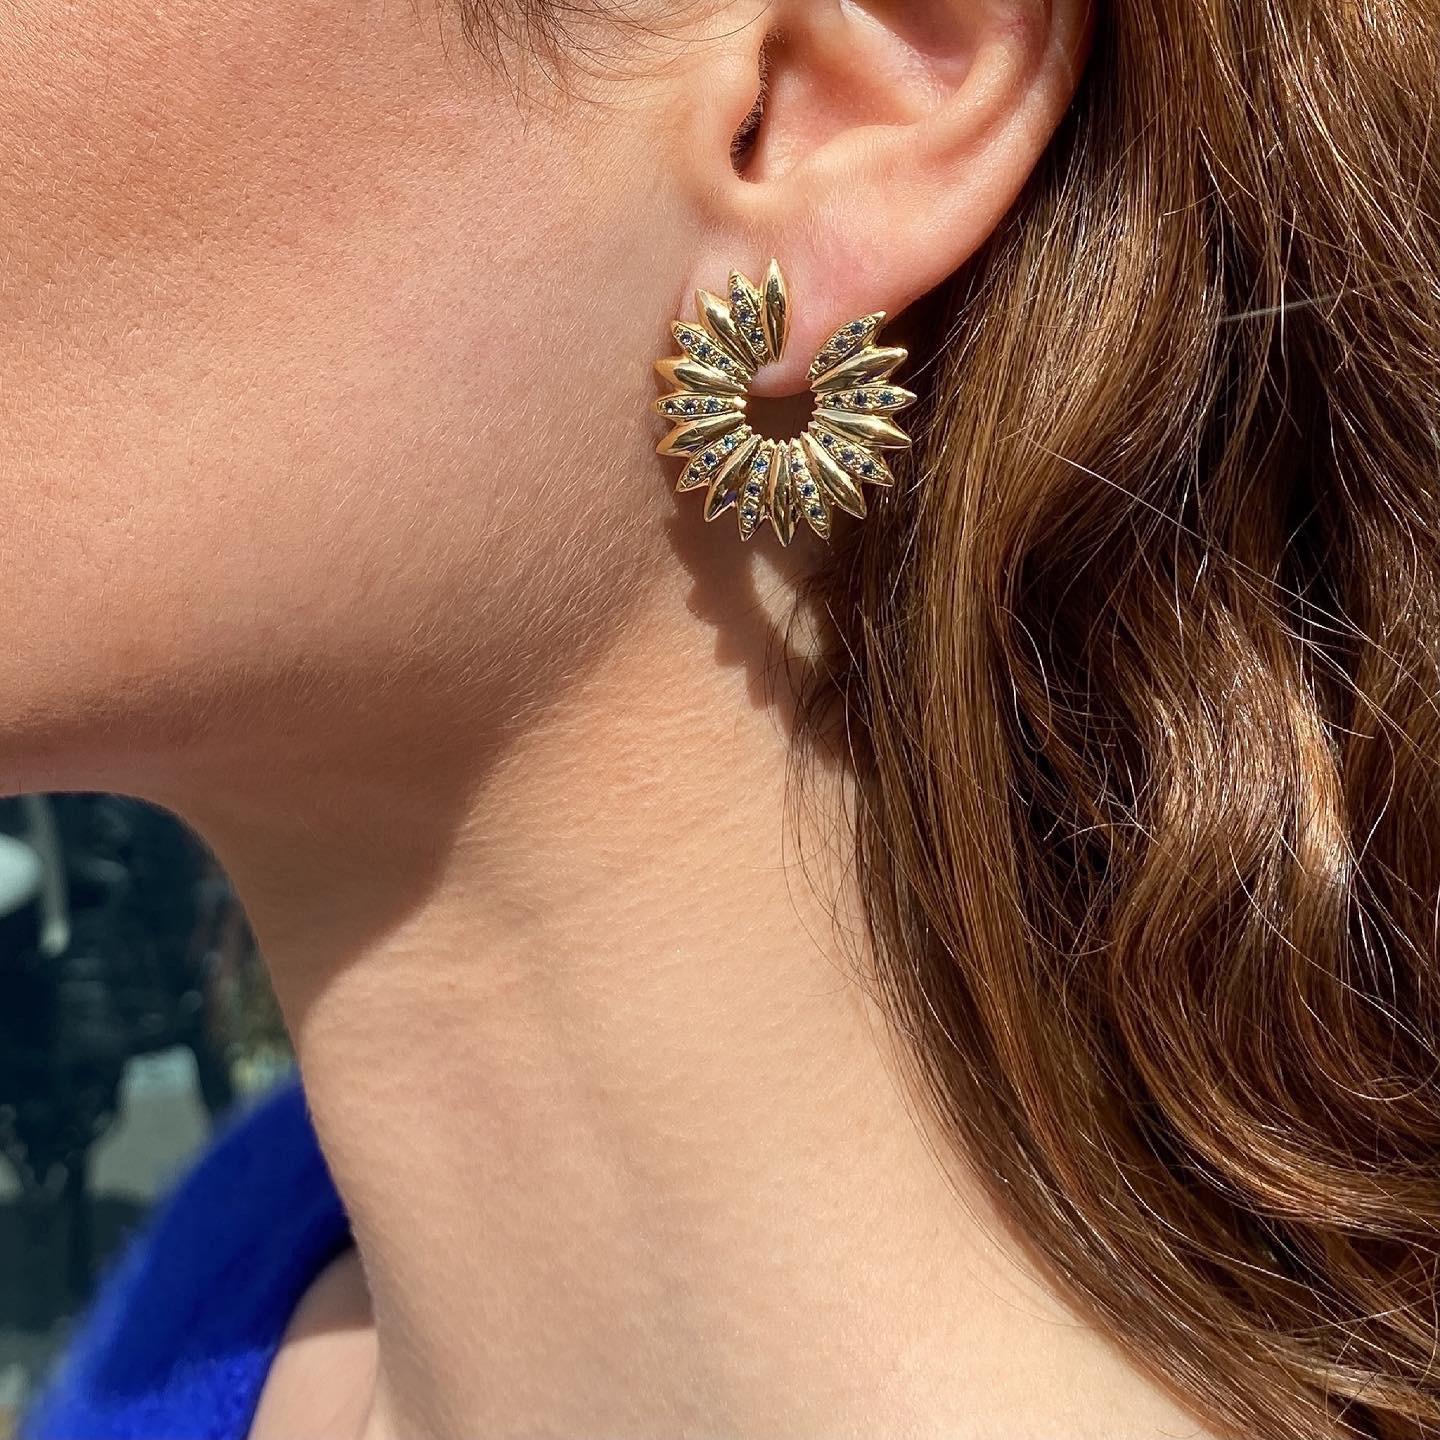 The ‘Grain array’ hoop earrings are crafted in 18K gold hallmarked in Cyprus. This striking pair of earrings, comes in a highly polished finish and features London Blue Topaz totaling 0,70 Cts. The clips at the back ensure a comfortable and secure